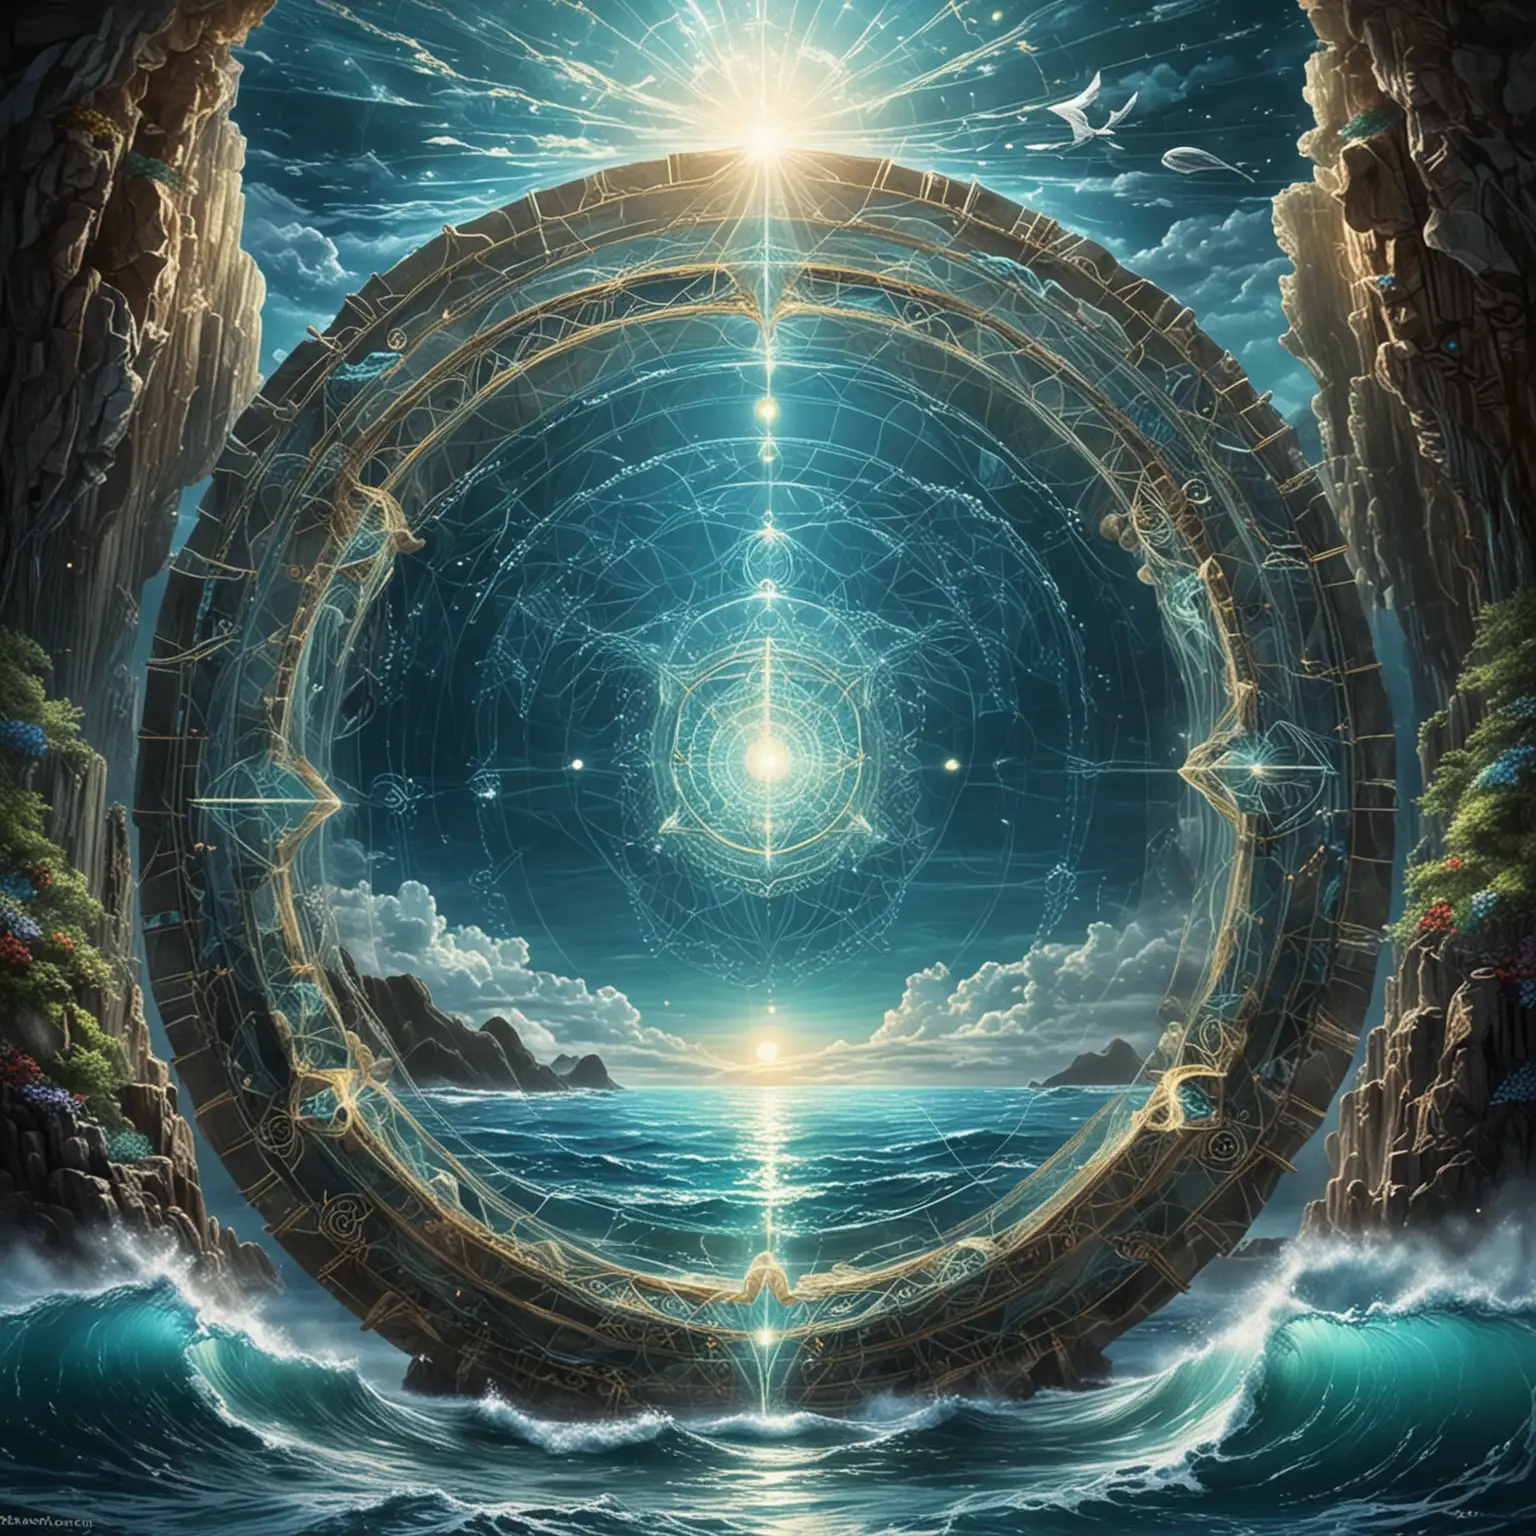 Lemuria portal ocean with light codes and sacred geometry